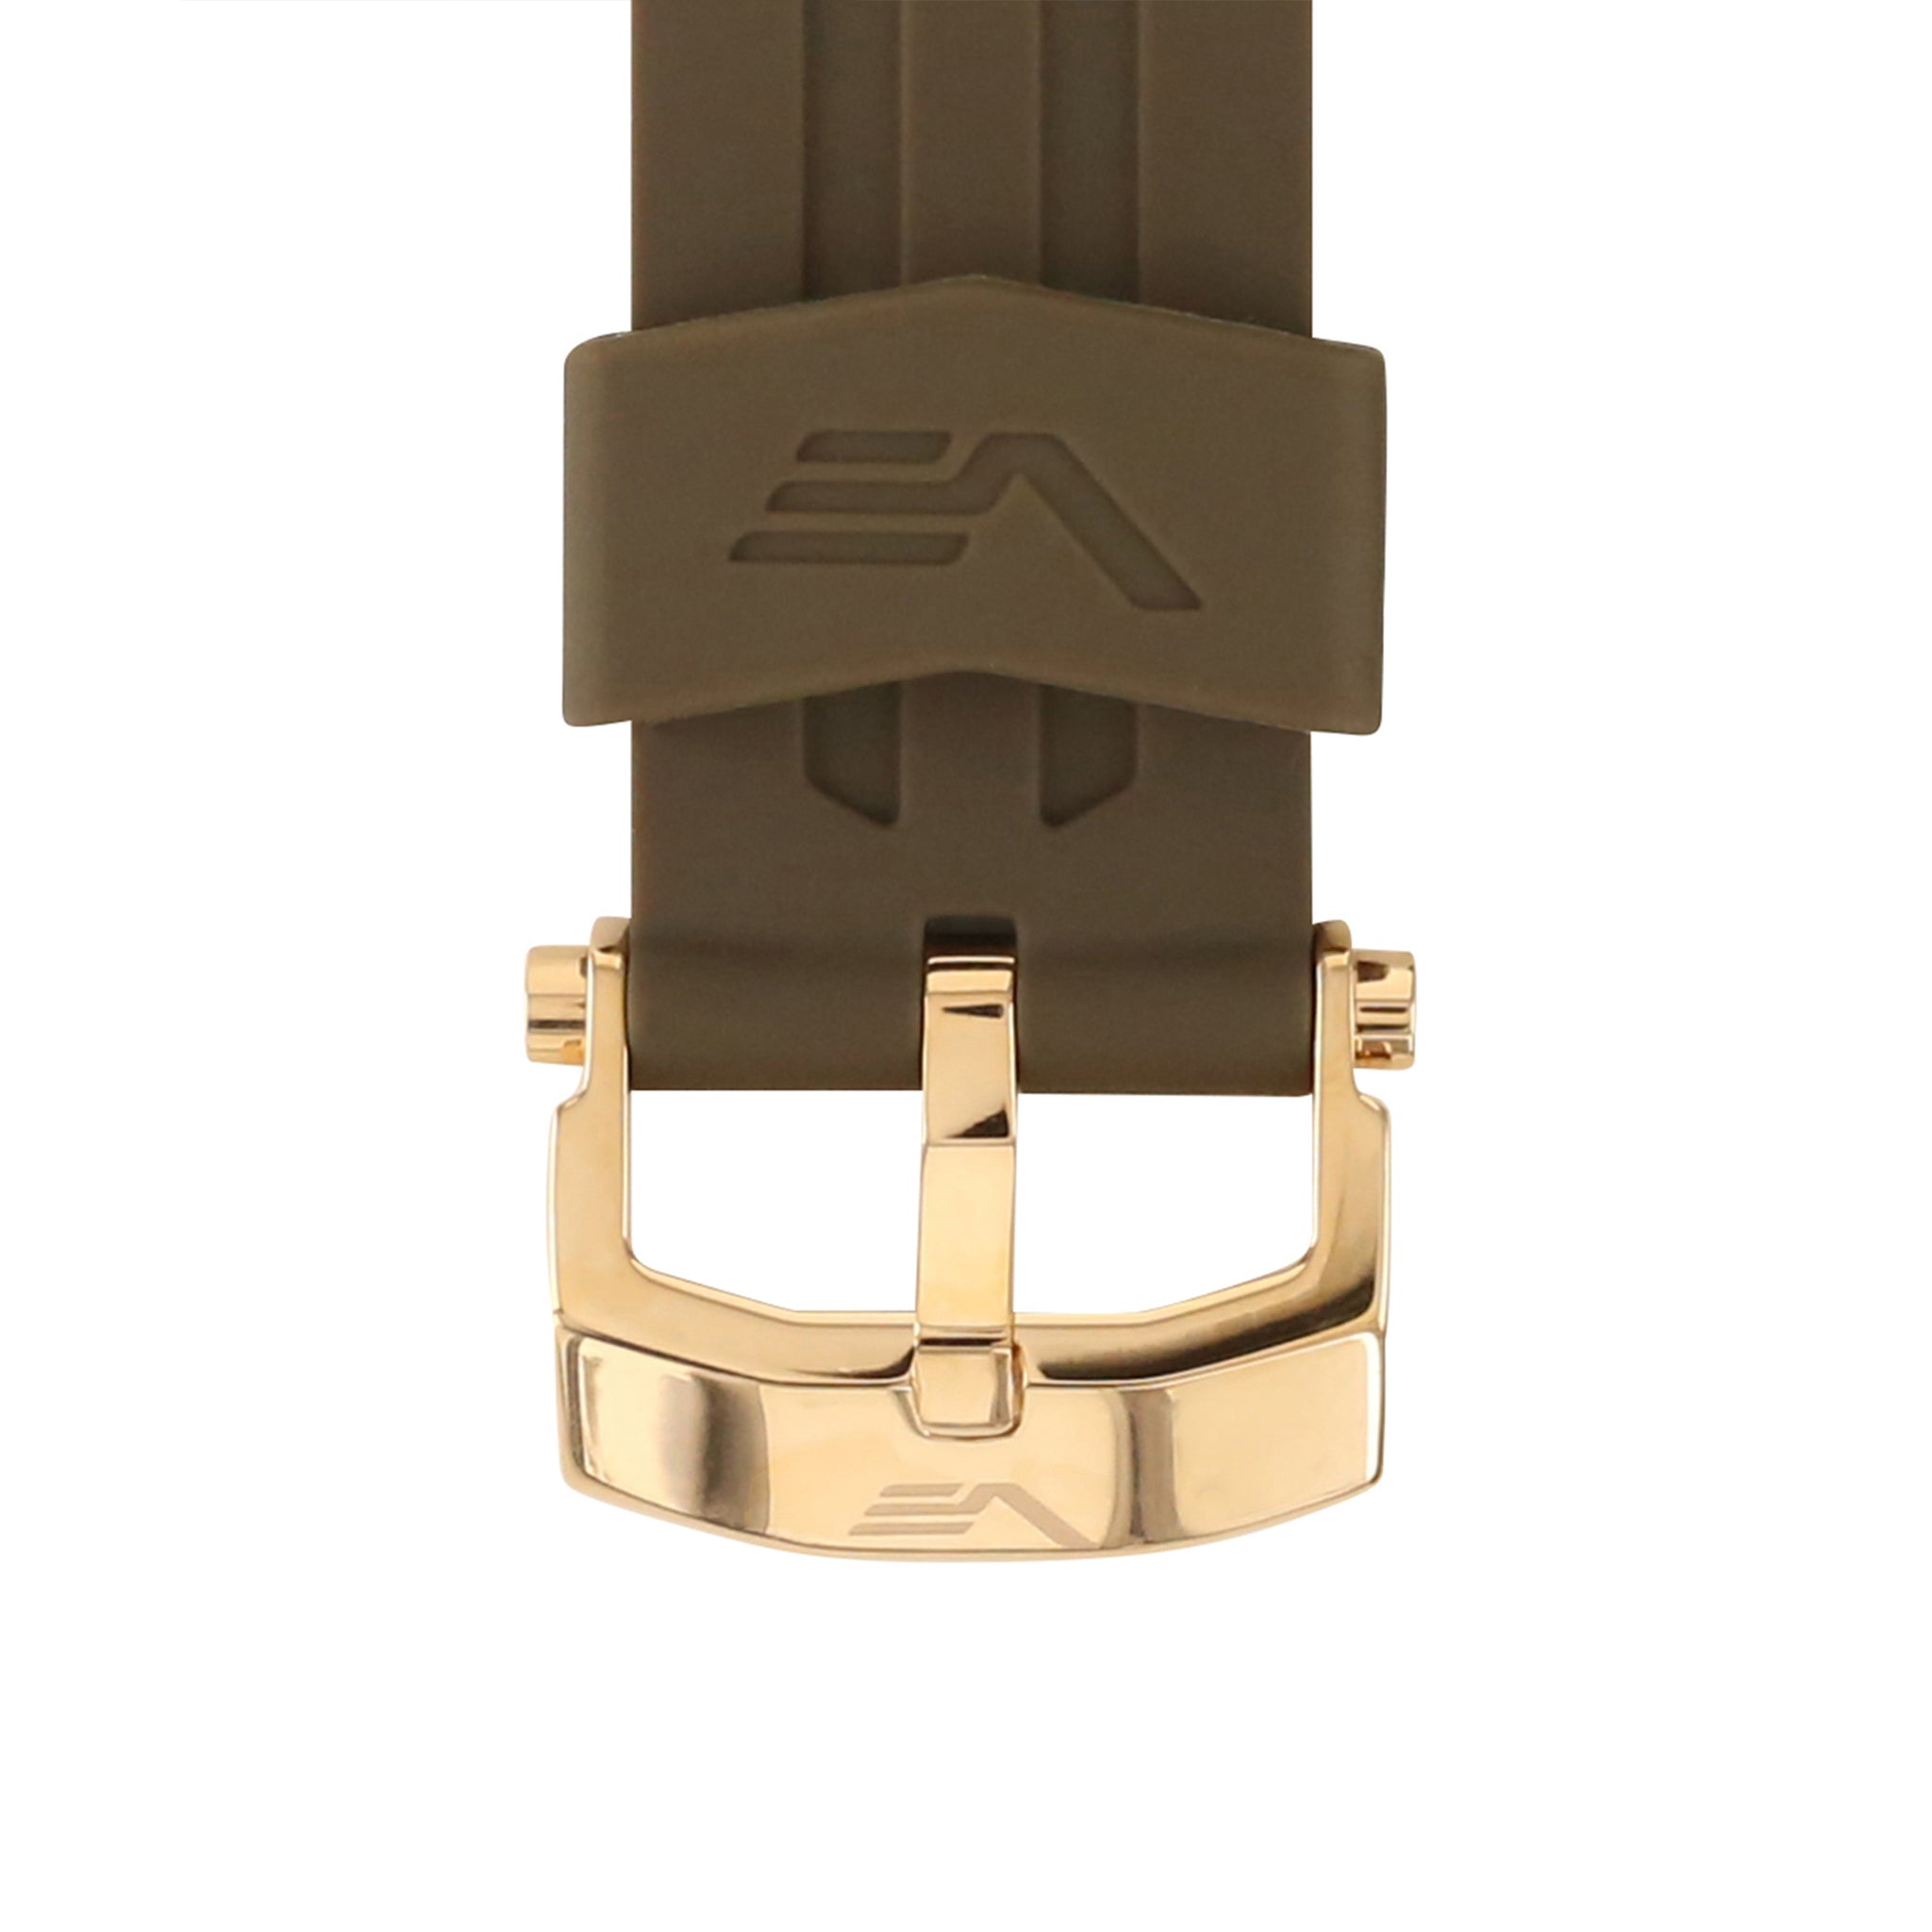 ENERGIA KHAKI SILICONE STRAP 26mm - ROSE GOLD BUCKLE